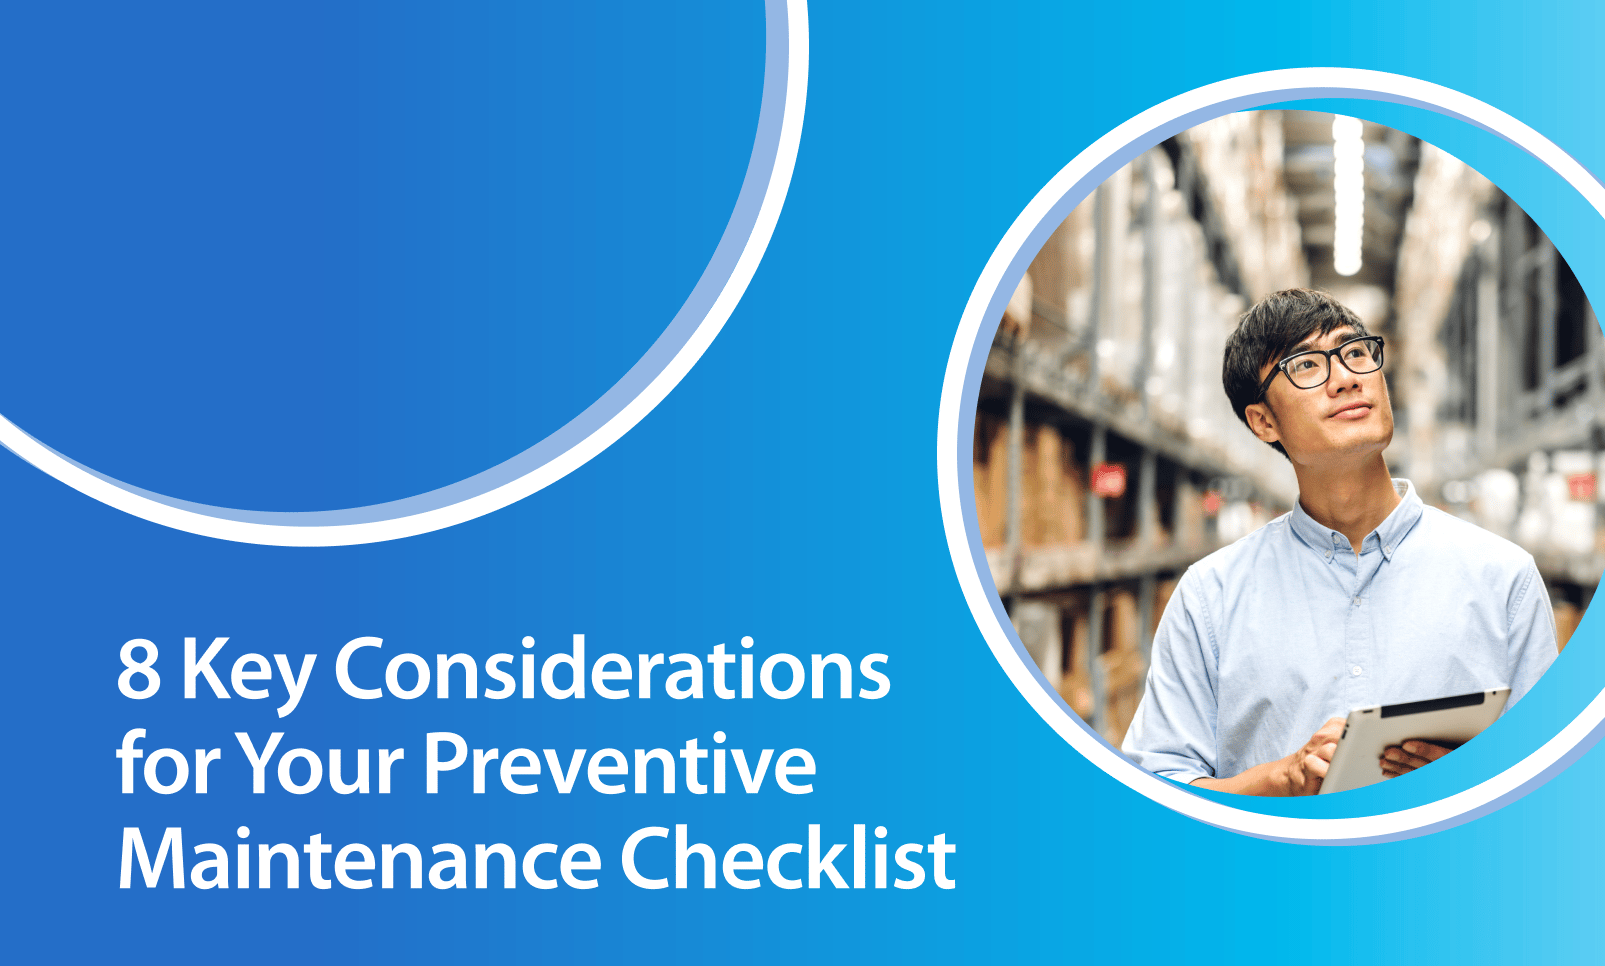 8 Key Considerations for Your Preventive Maintenance Checklist